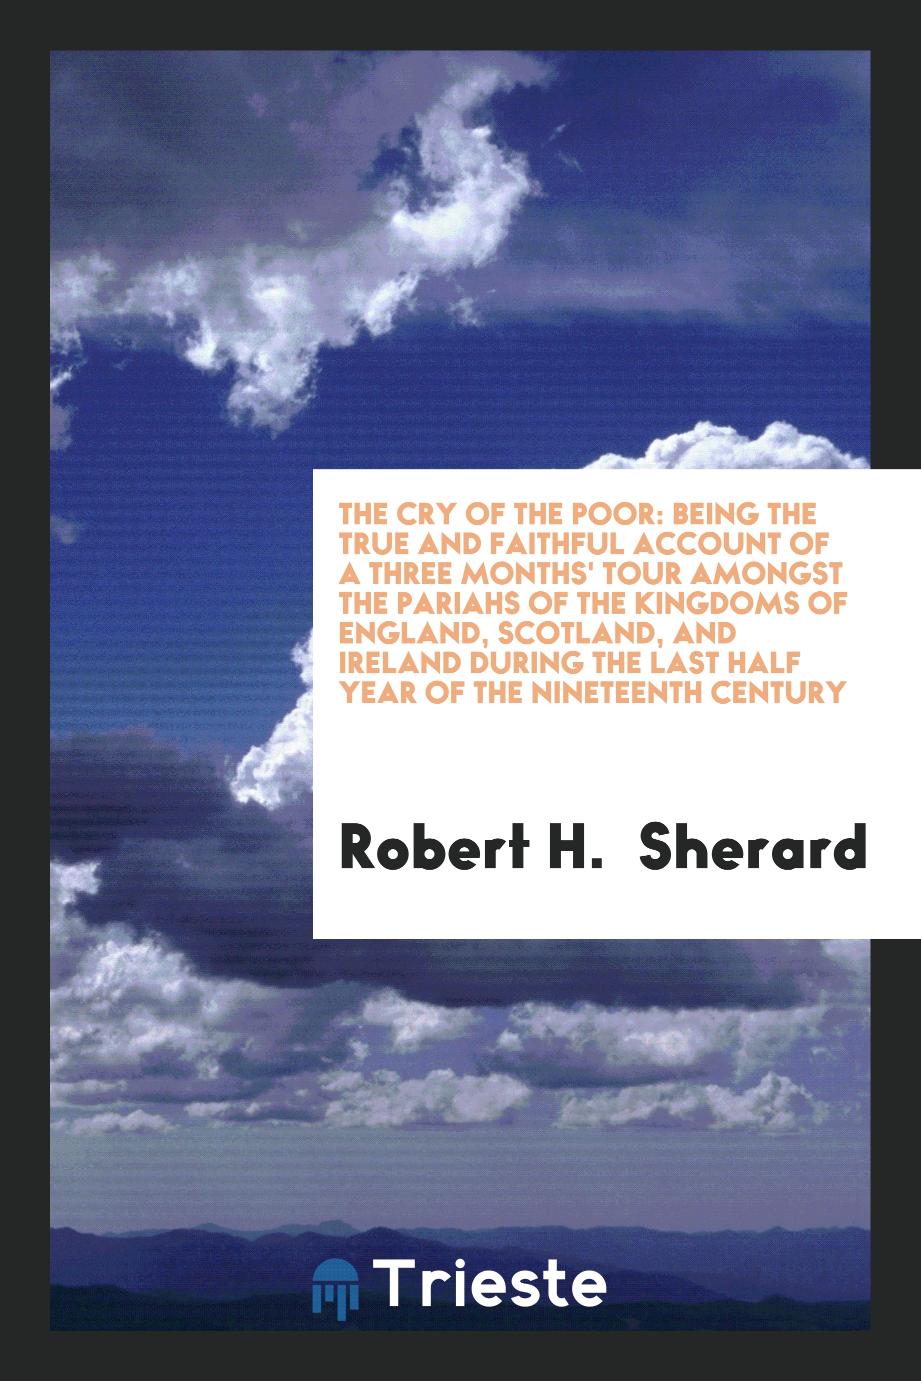 The Cry of the Poor: Being the True and Faithful Account of a Three Months' Tour Amongst the Pariahs of the Kingdoms of England, Scotland, and Ireland During the Last Half Year of the Nineteenth Century